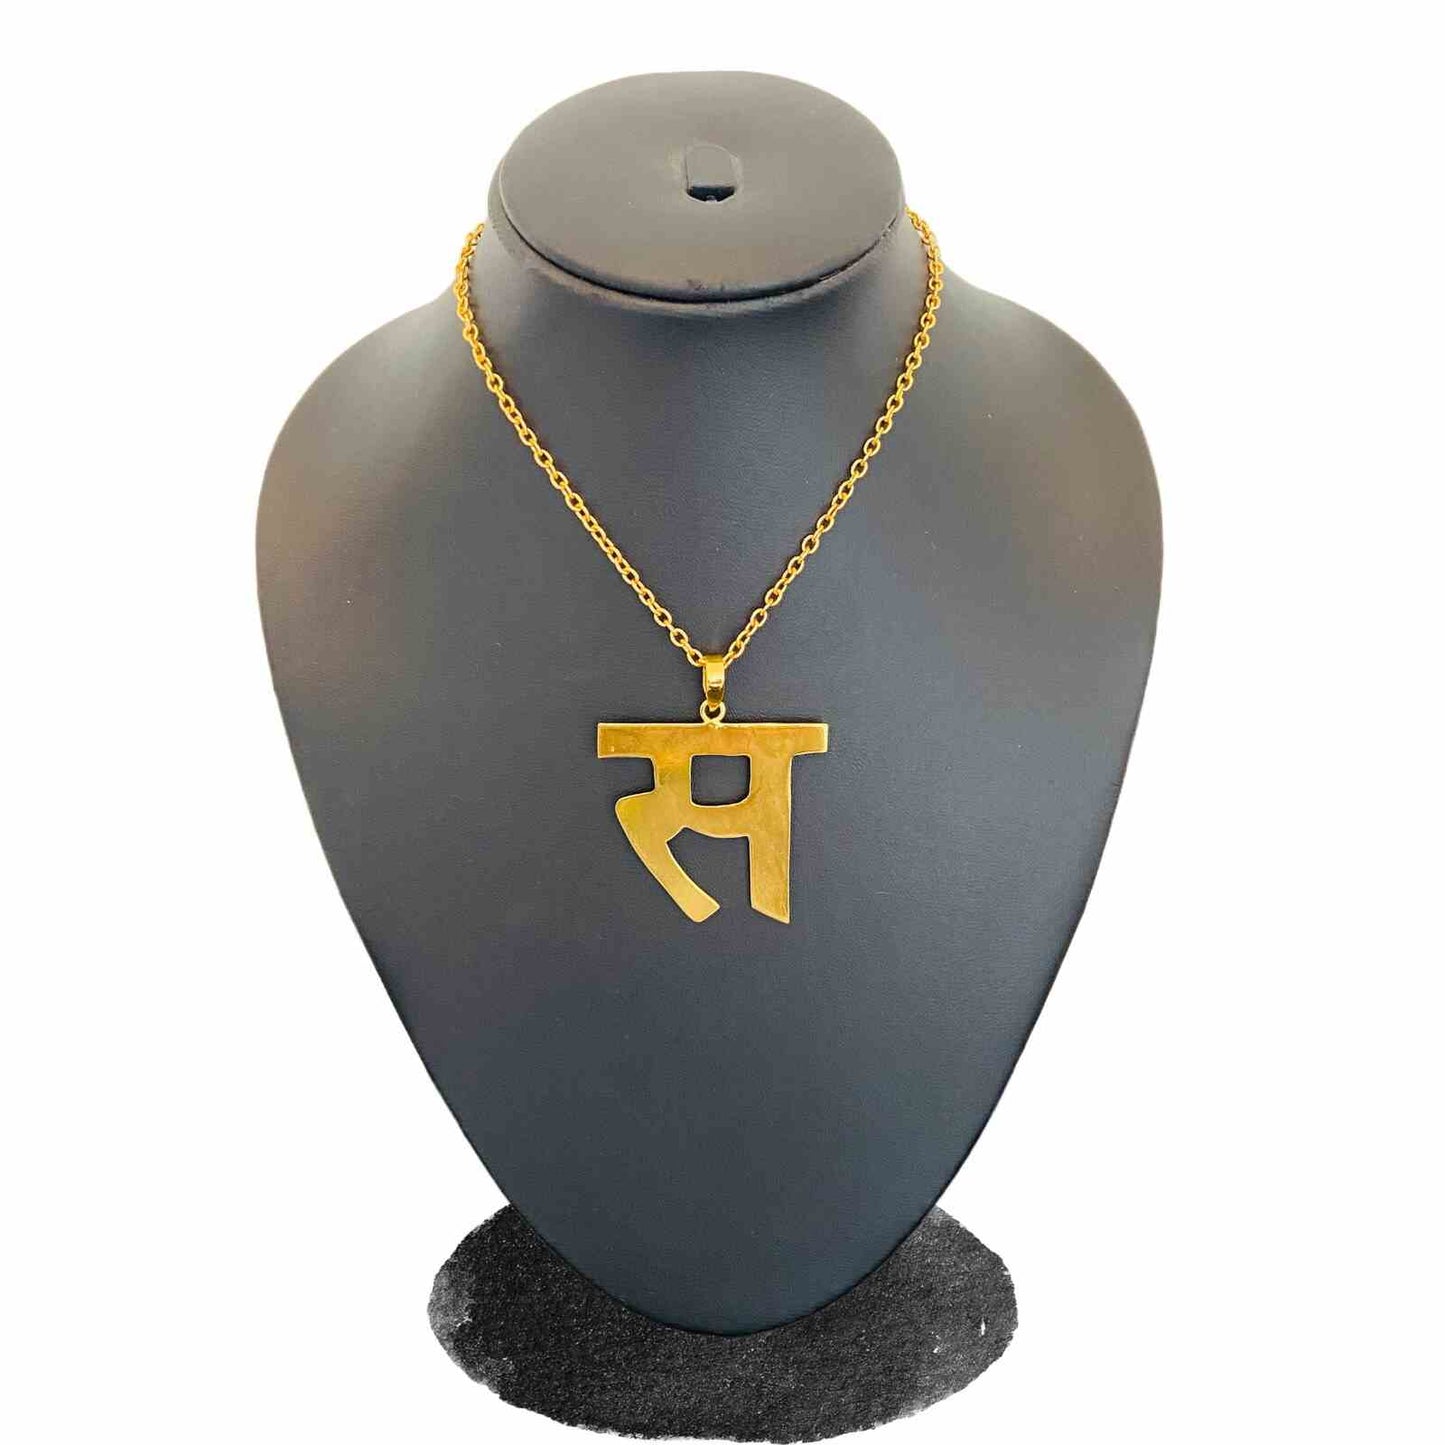 Gold Initial Necklace | Hindi Jewellery | Costume Jewellery | स Necklace